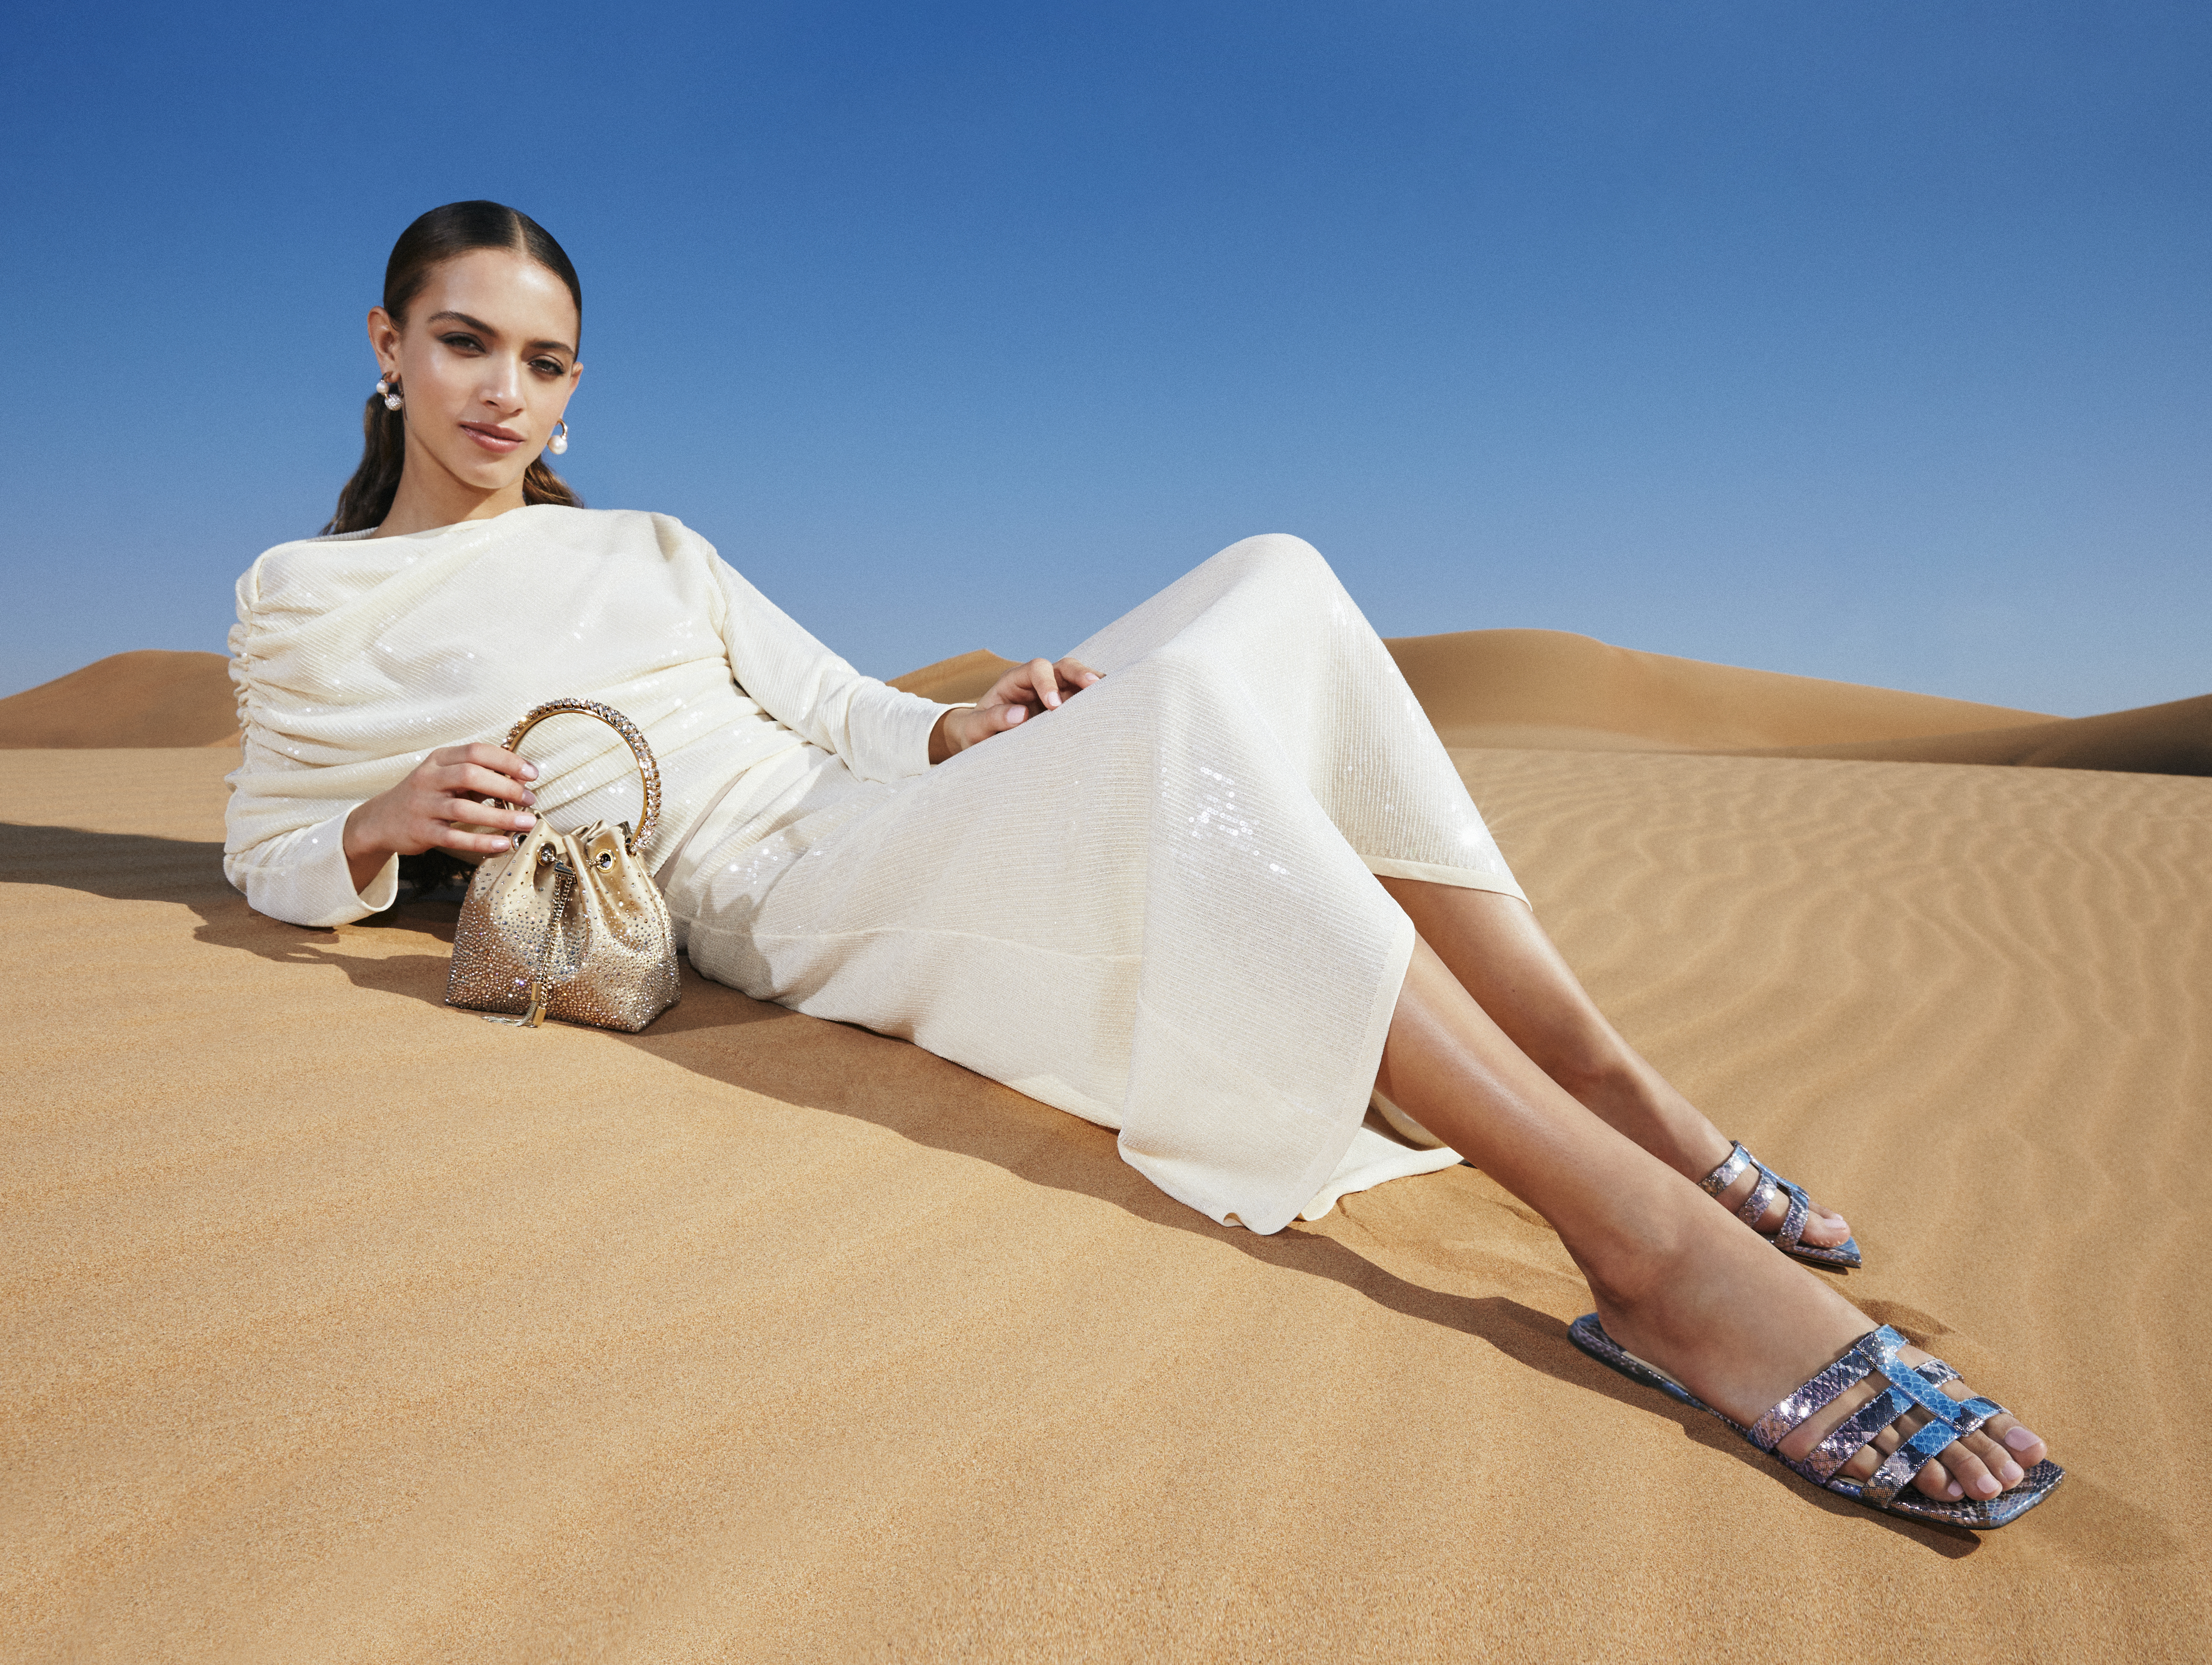 EXCLUSIVE RAMADAN COLLECTION FOR THE MIDDLE EAST – The Fashion With Style